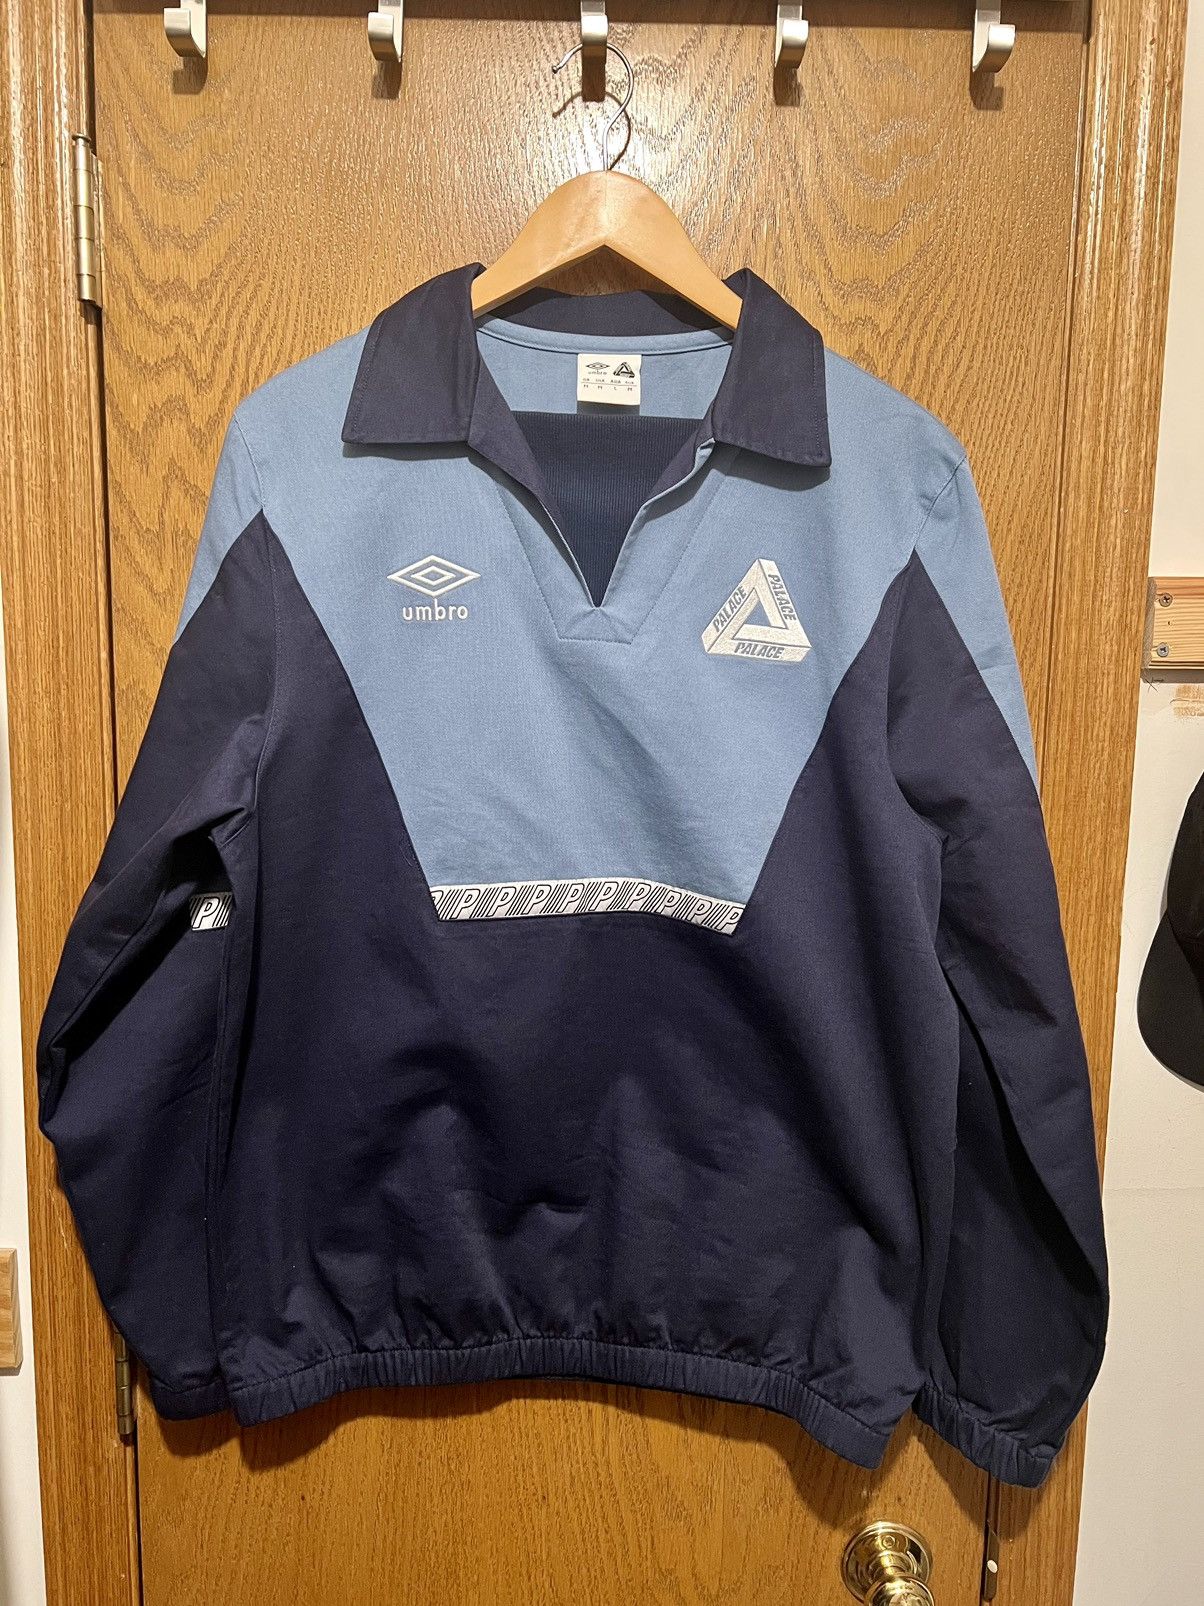 Palace Palace x Umbro Classic Drill Top | Grailed